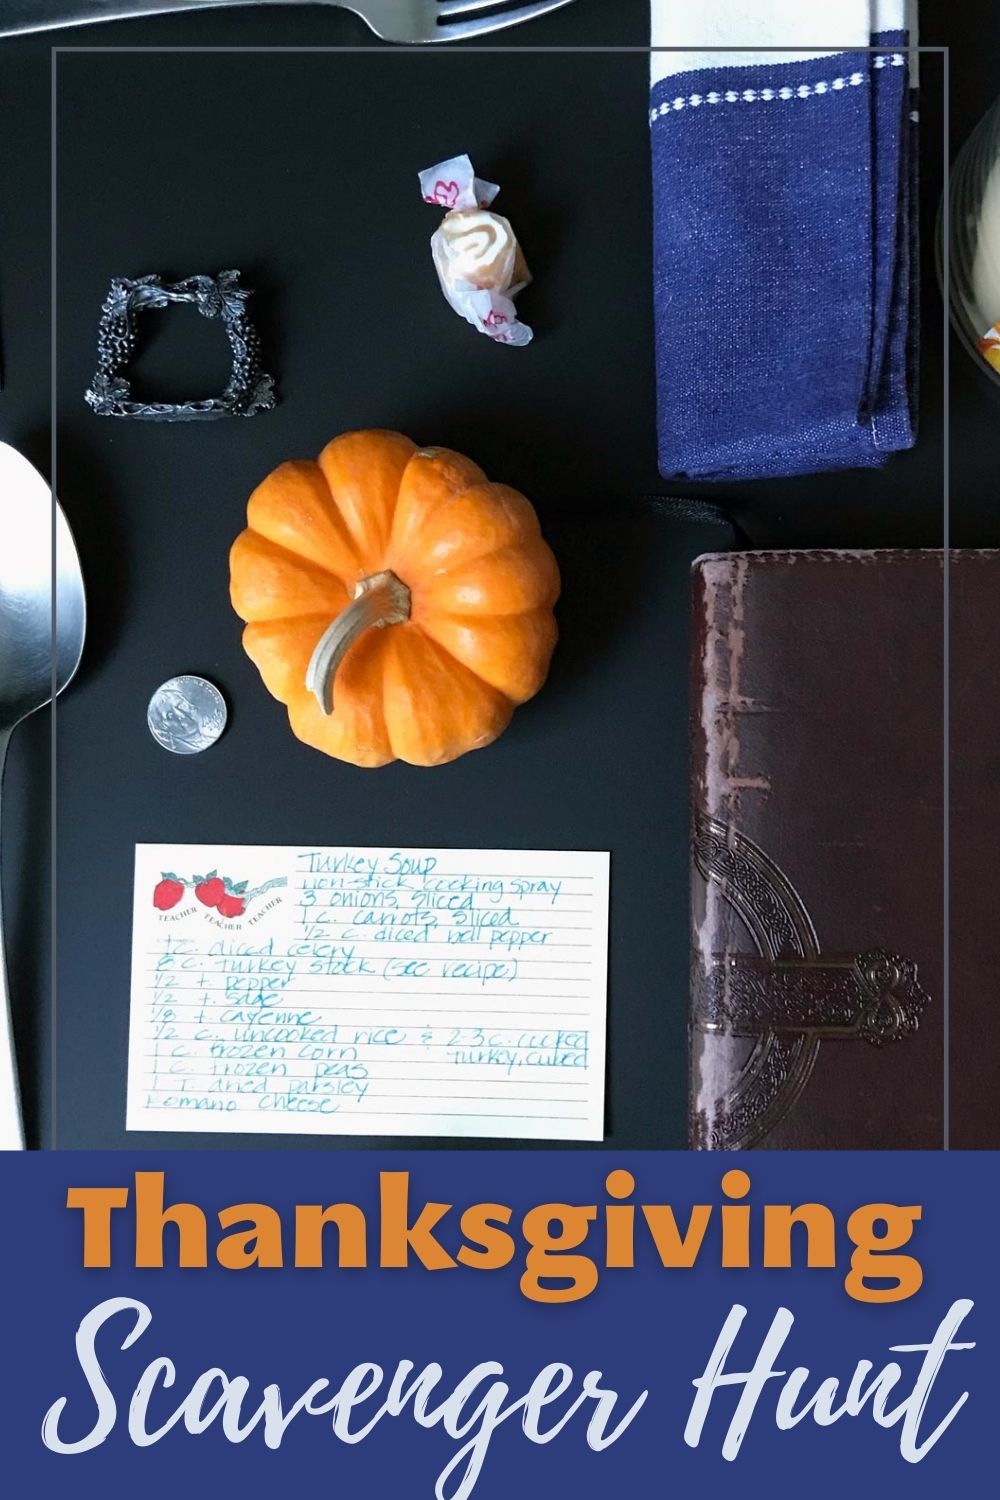 Thanksgiving Scavenger Hunt text overlay on flatlay of collected items.